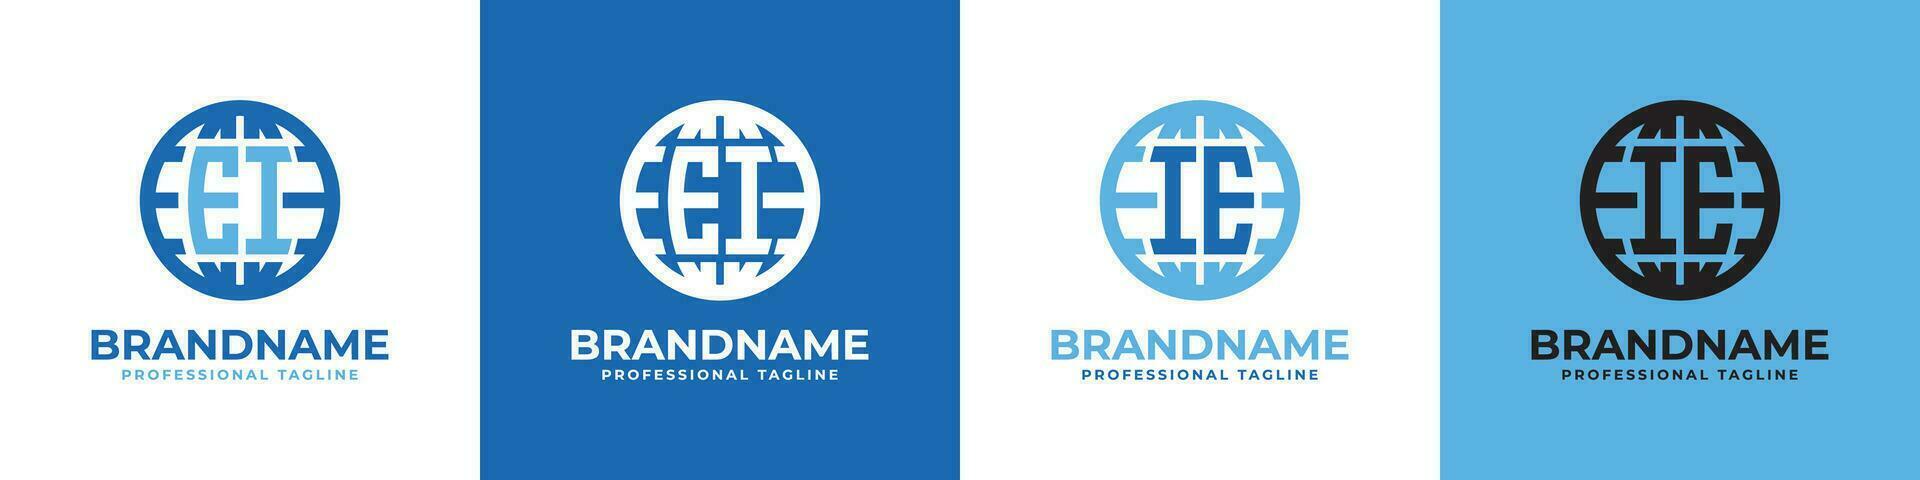 Letter EI and IE Globe Logo Set, suitable for any business with EI or IE initials. vector